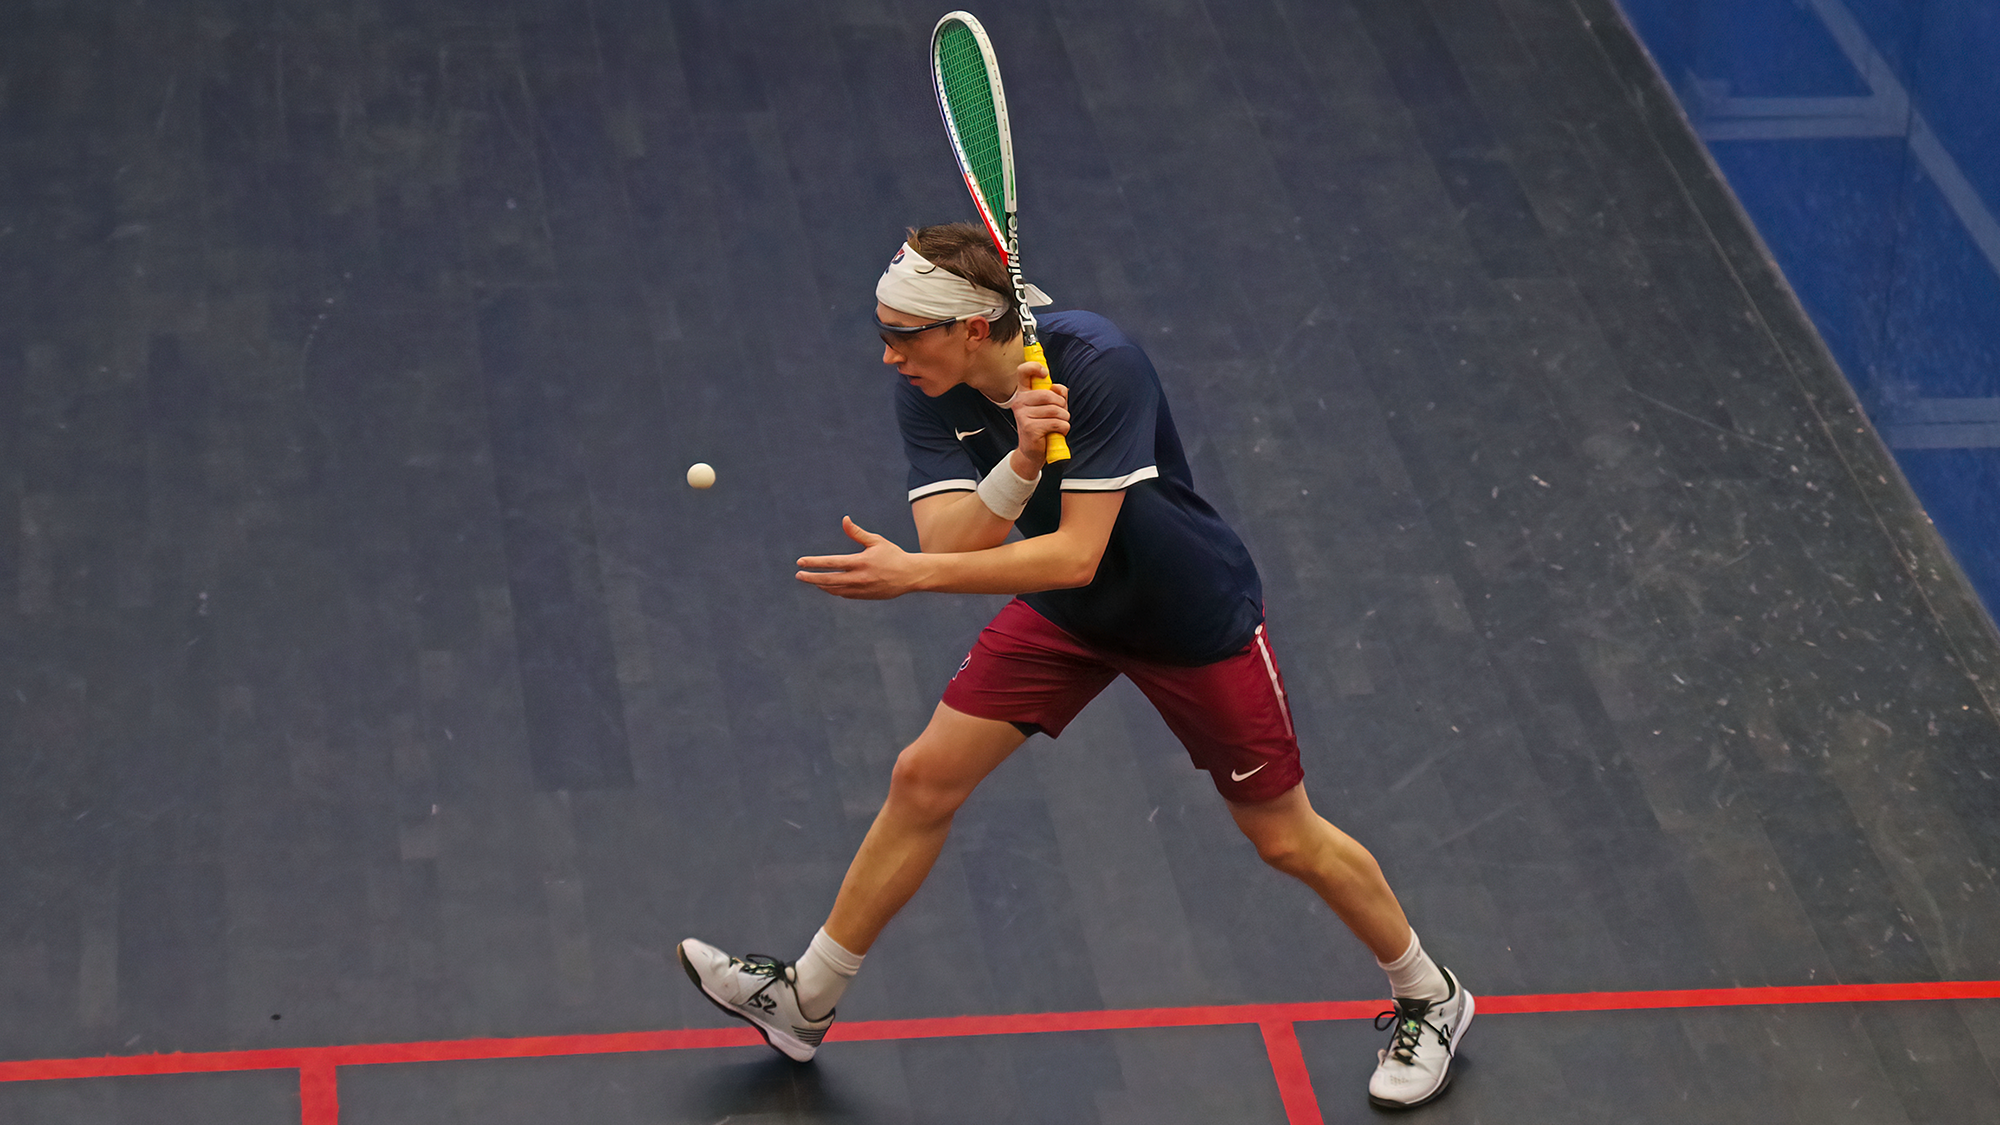 Andrew Douglas prepares to swing at the ball during a squash match.